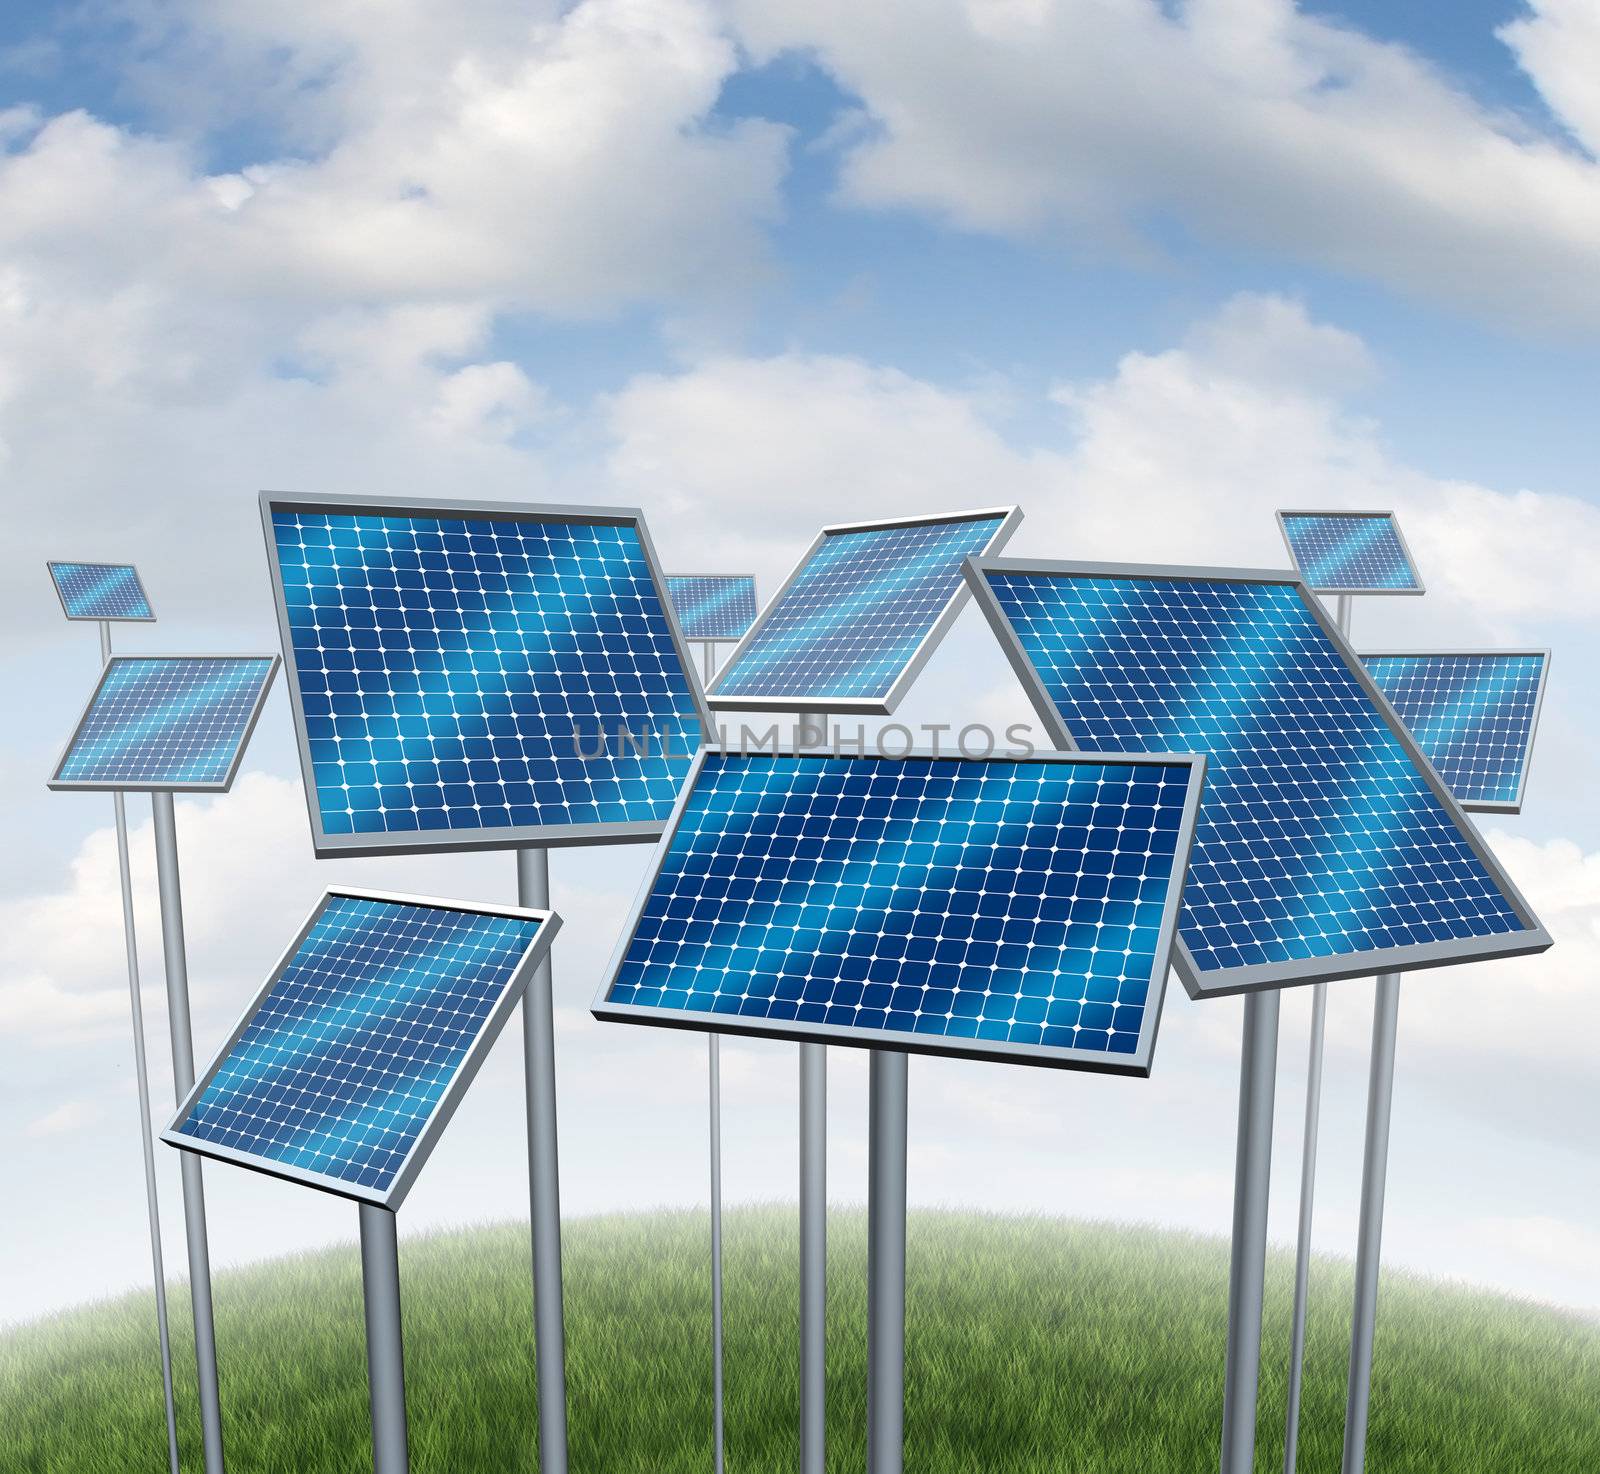 Renewable energy with solar panels symbol of a photovoltaic power station technology or sun farm represented by a group of three dimensional structures on a summer sky.